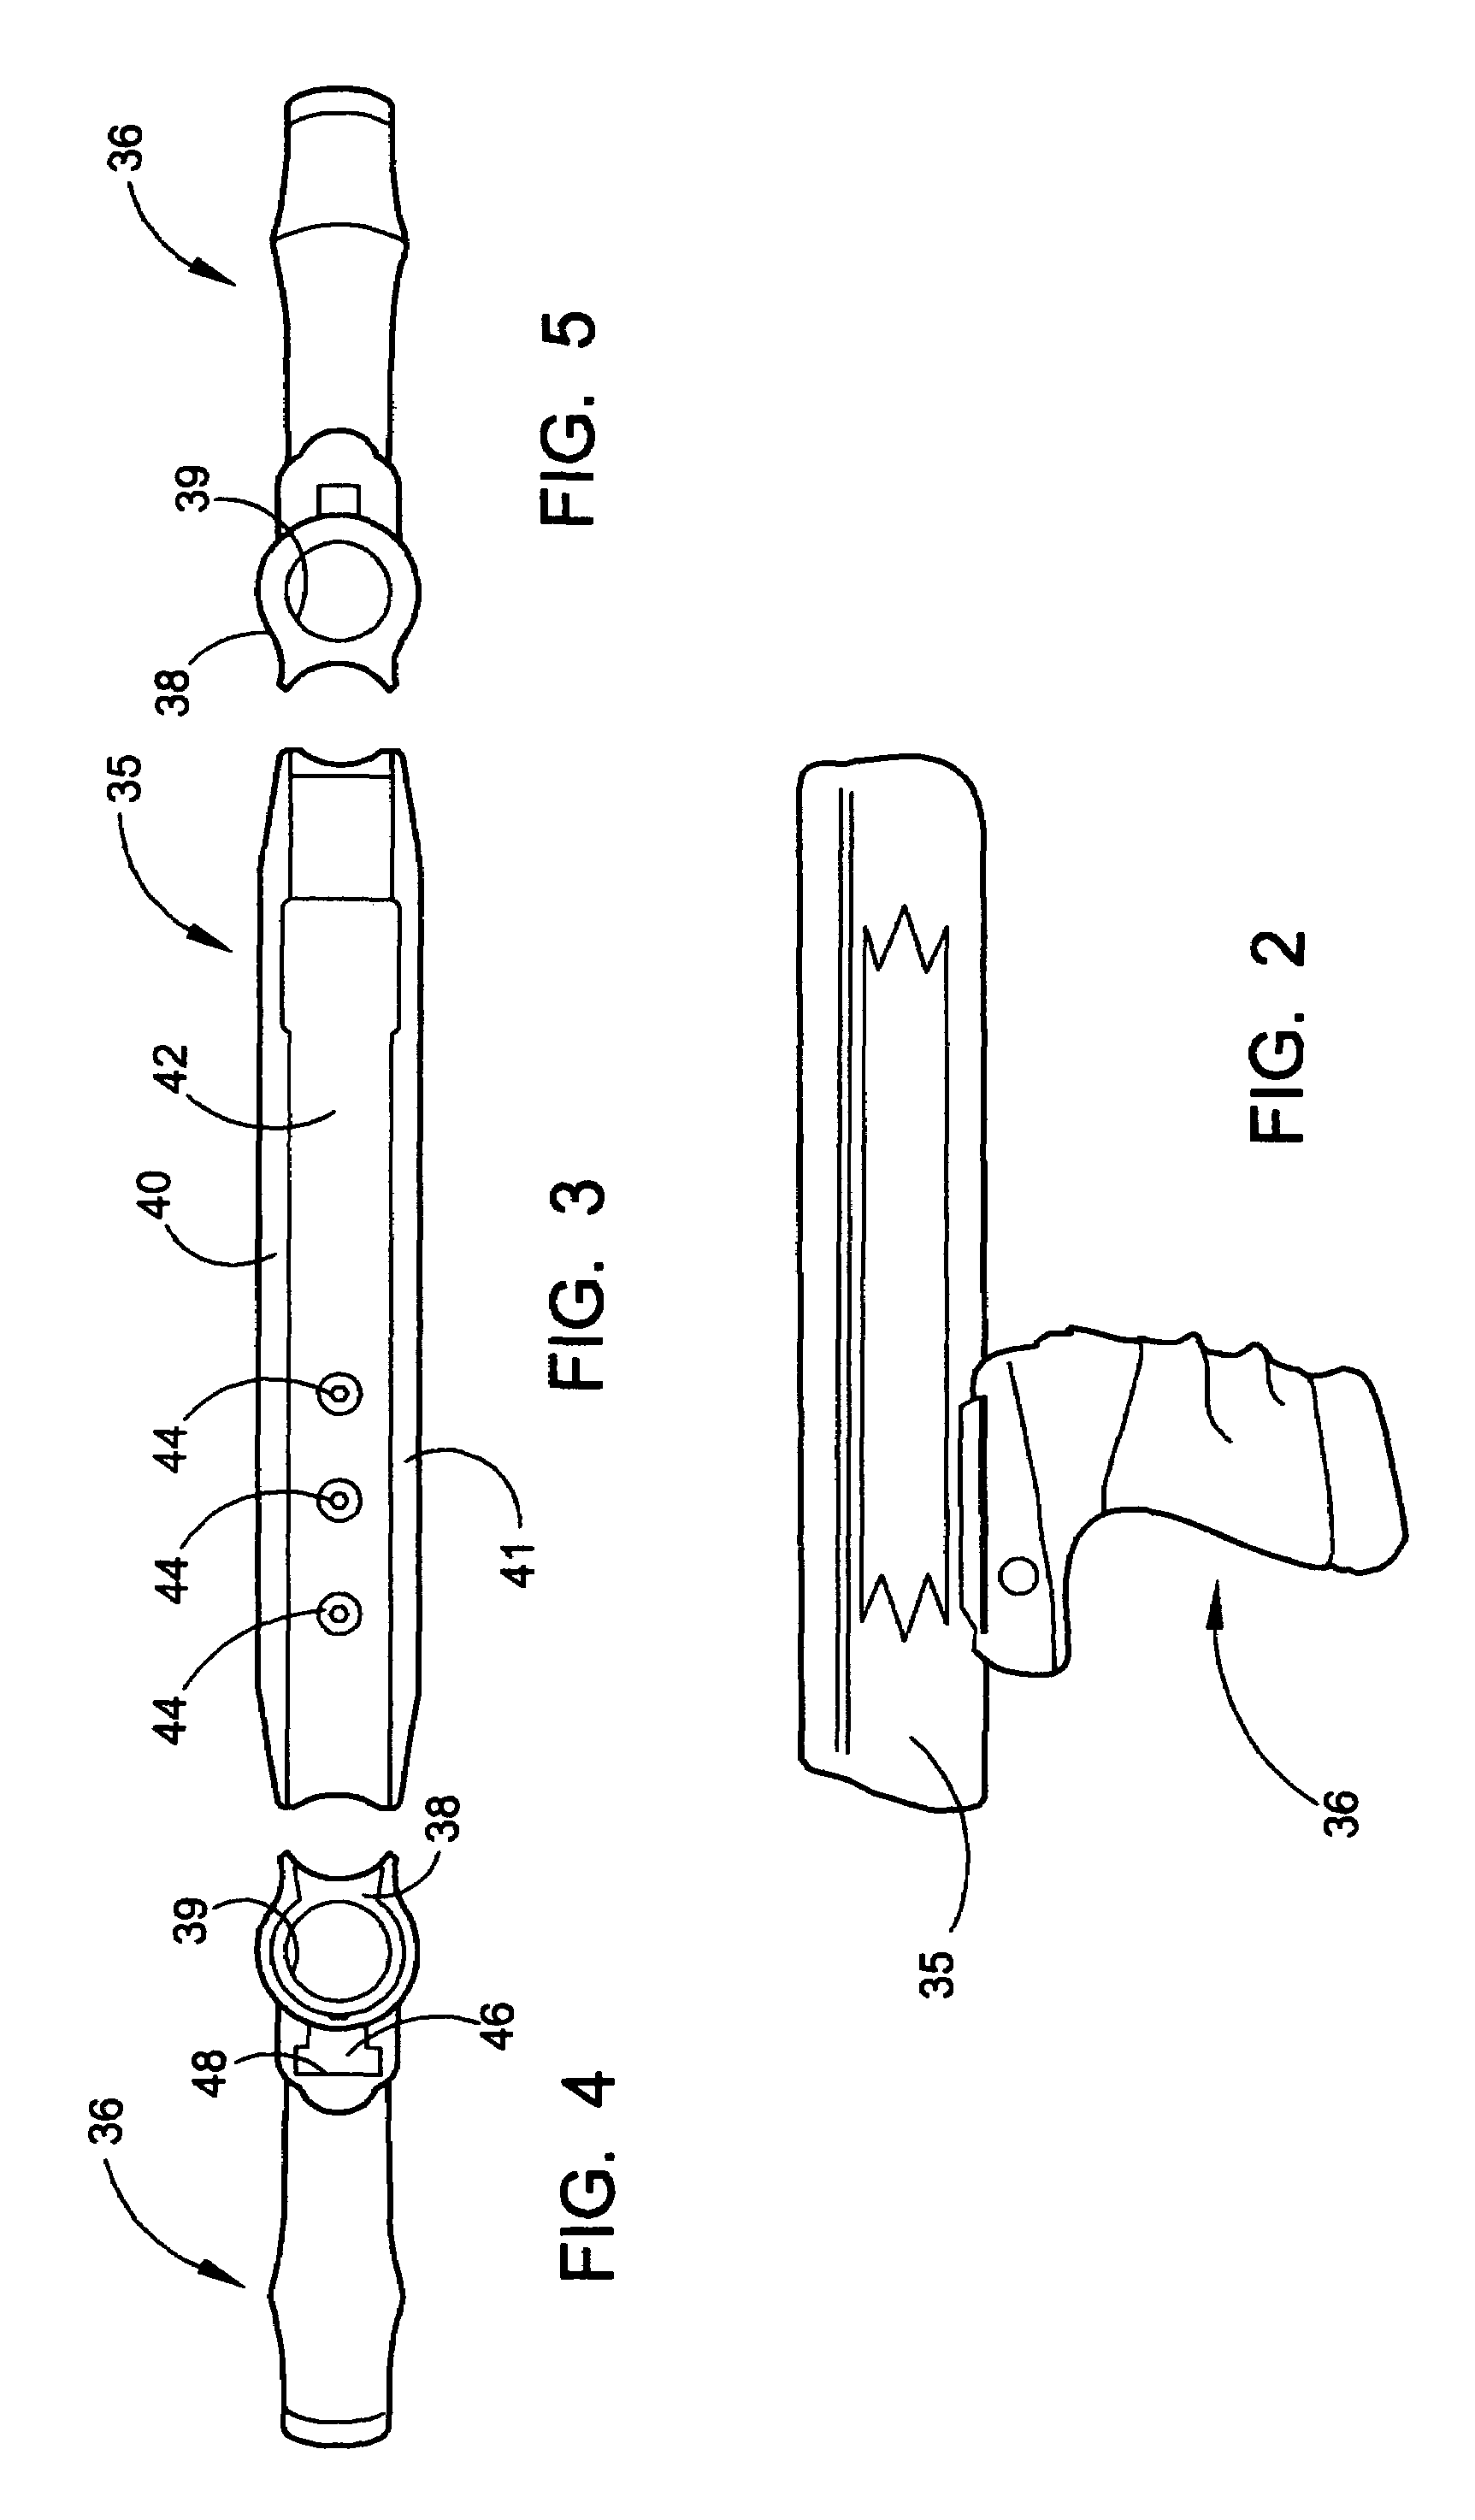 Recoil system for the forend of a firearm